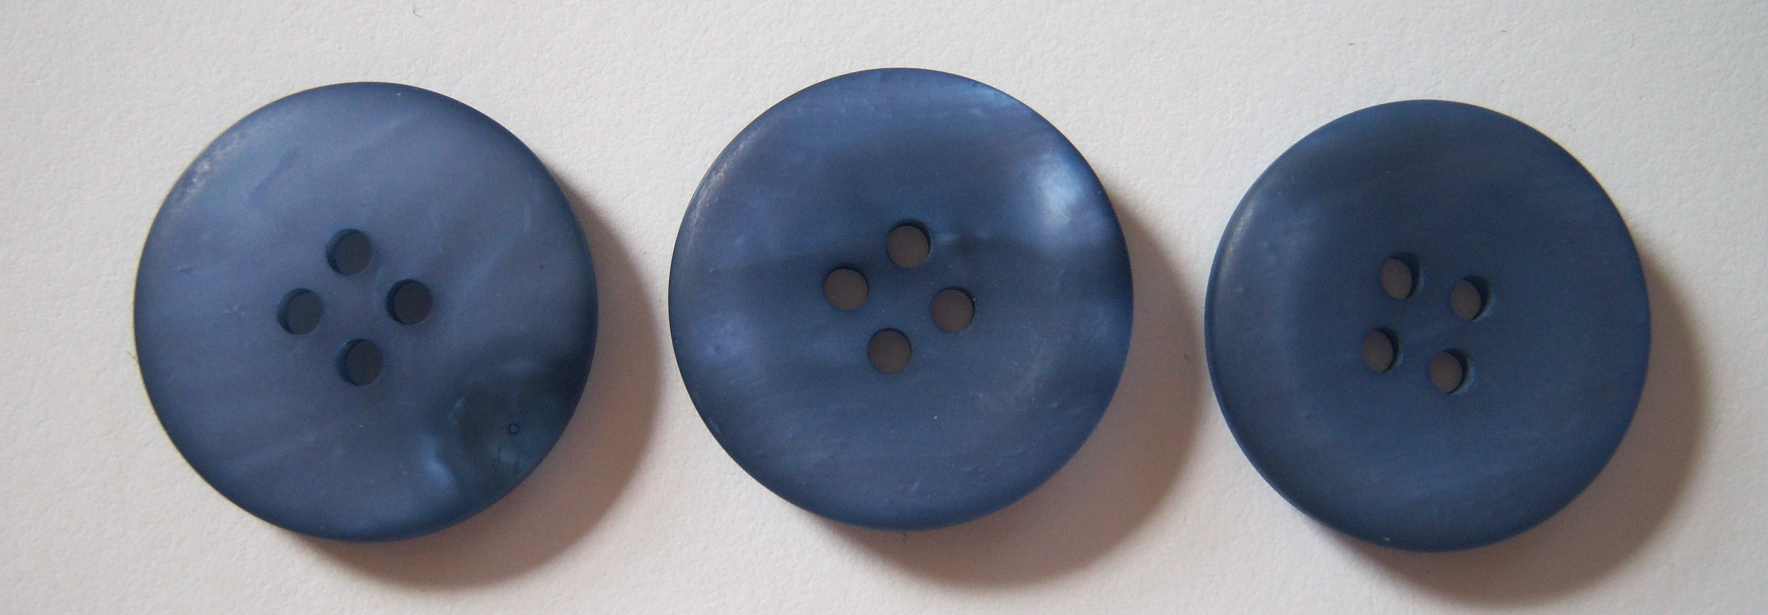 Steel Blue Pearlized 1" Poly 4 Hole Button